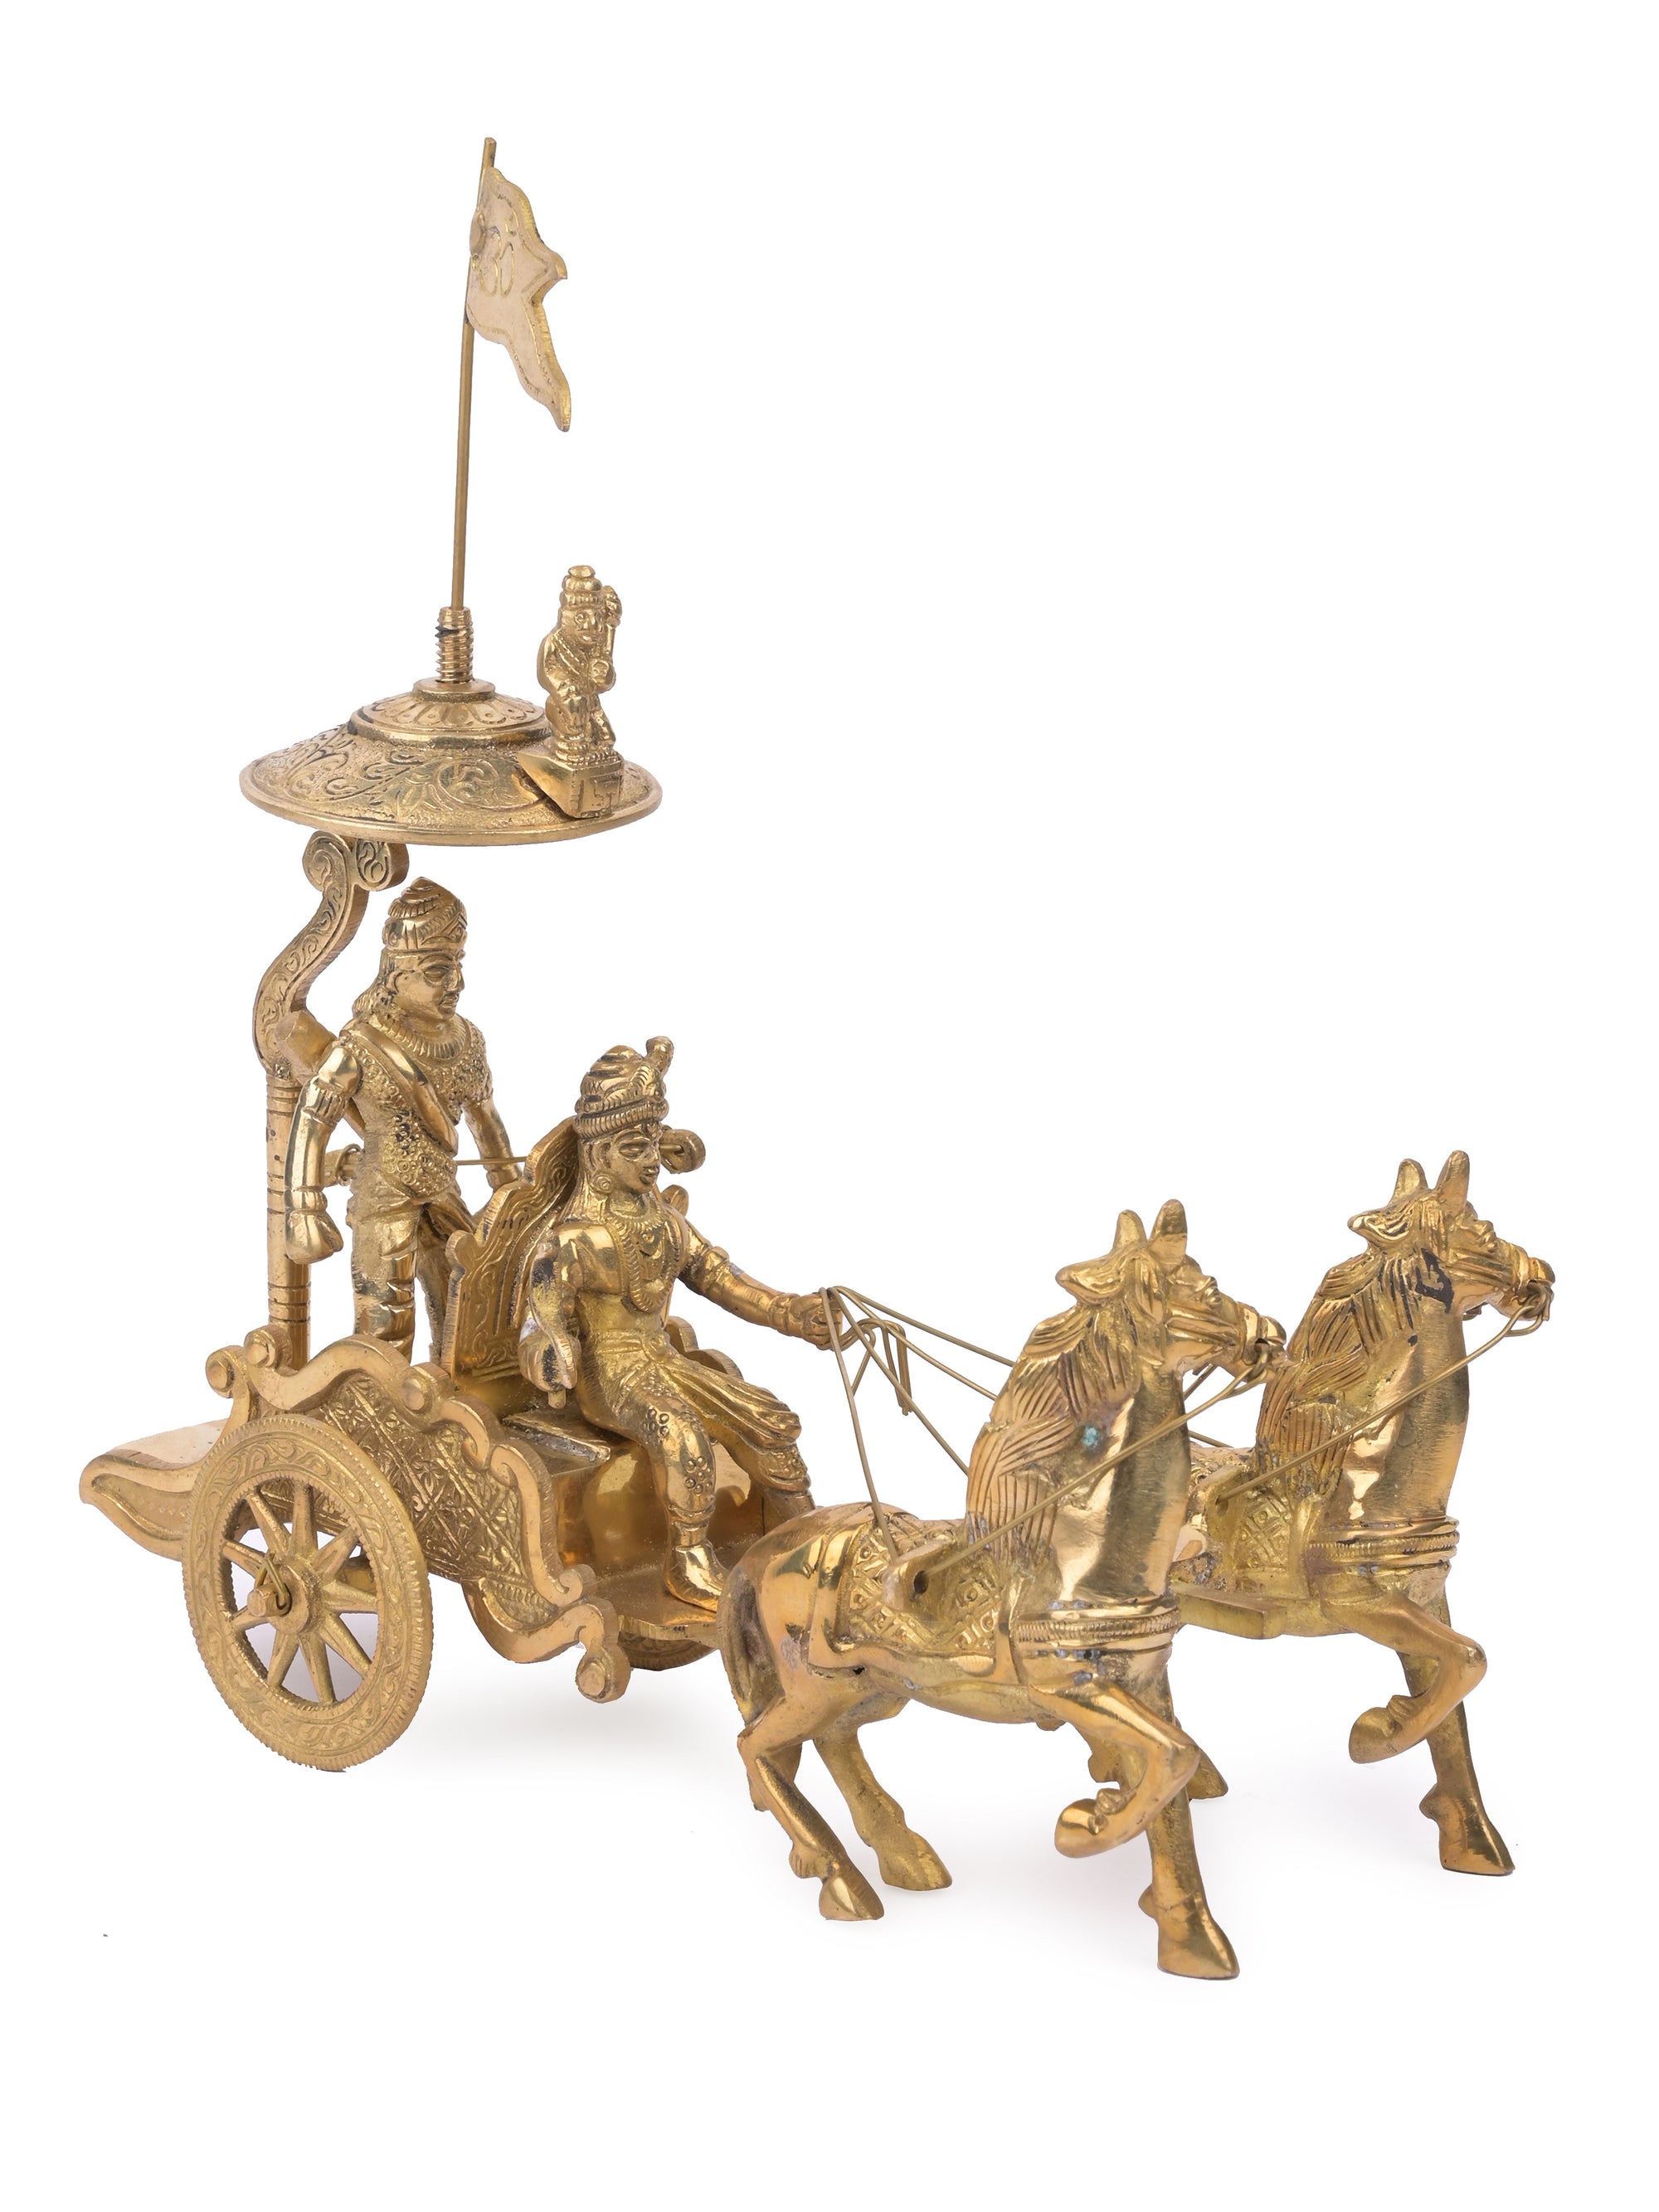 Antique Brass showpiece of Lord Krishna and Arjun on a Chariot, Arjun Rath - The Heritage Artifacts